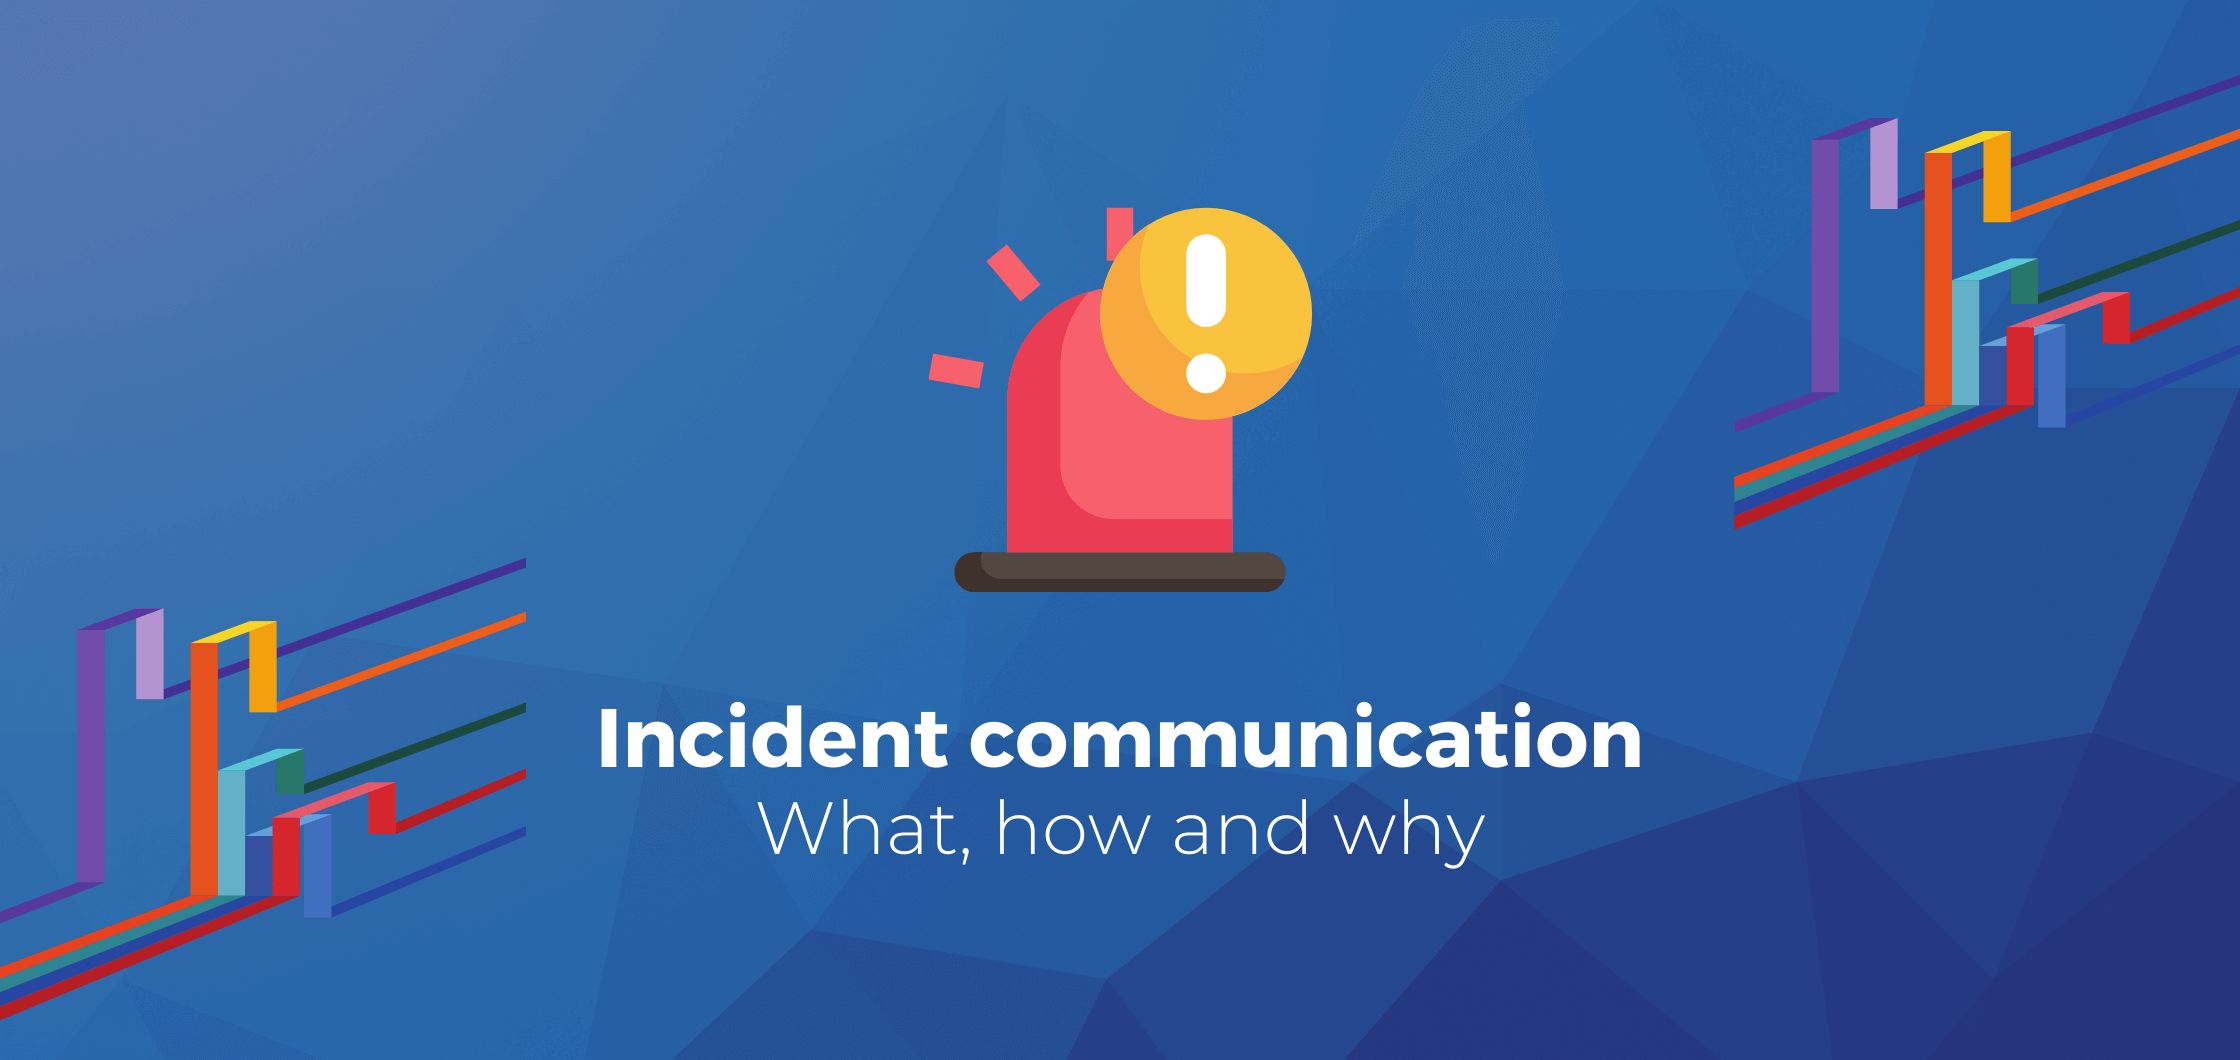 All About Incident Communication: What it Is, How to Do It, and Why It’s Crucial for Business